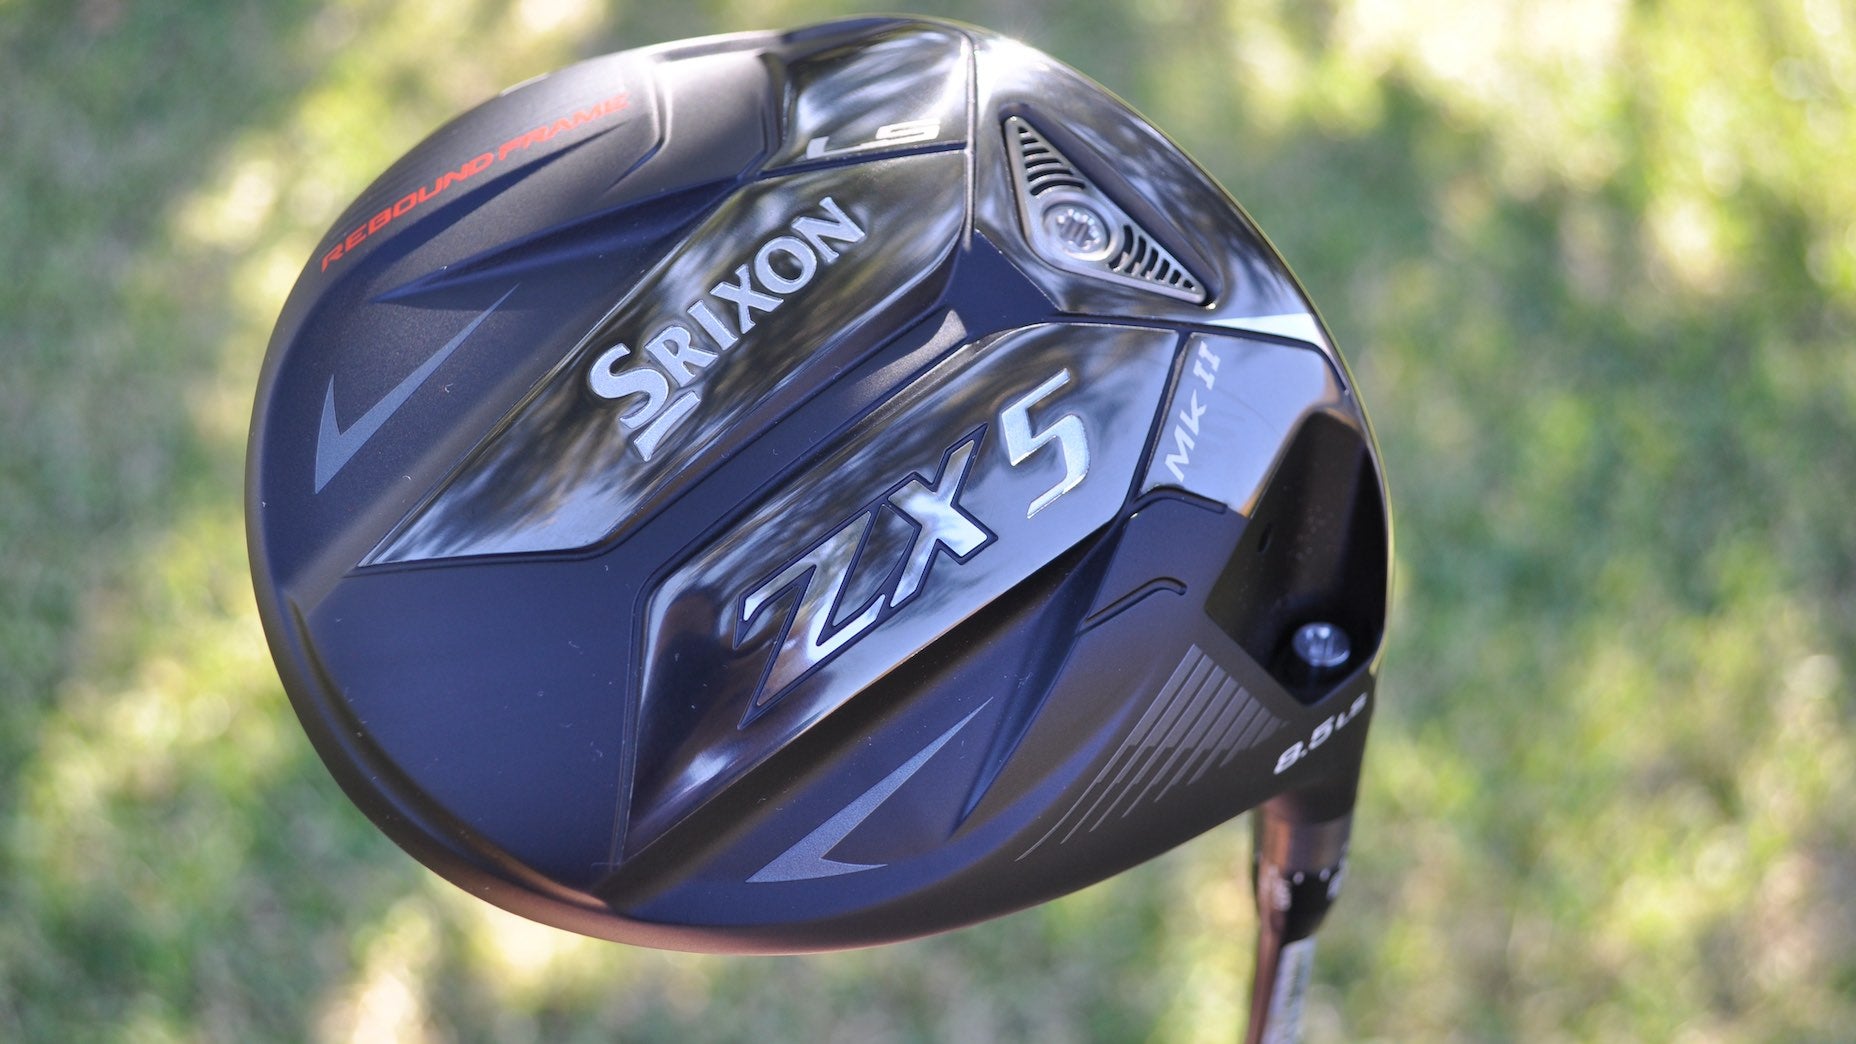 Srixon ZX5, ZX7 MKII drivers, fairway woods and hybrids | ClubTest